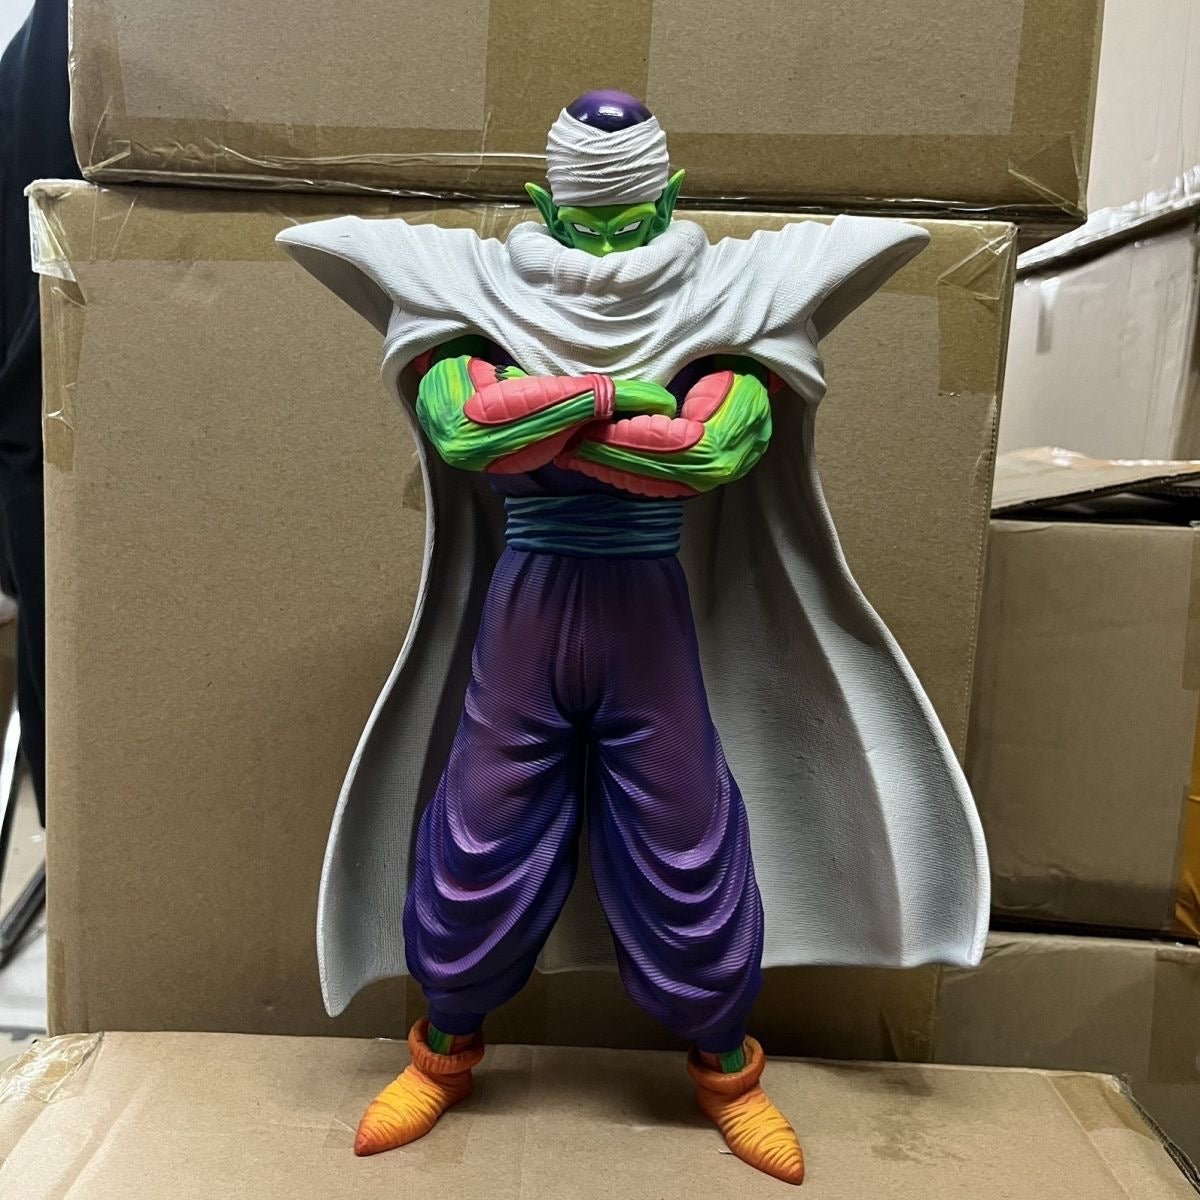 Personal order, piccolo - Lyk Repaint